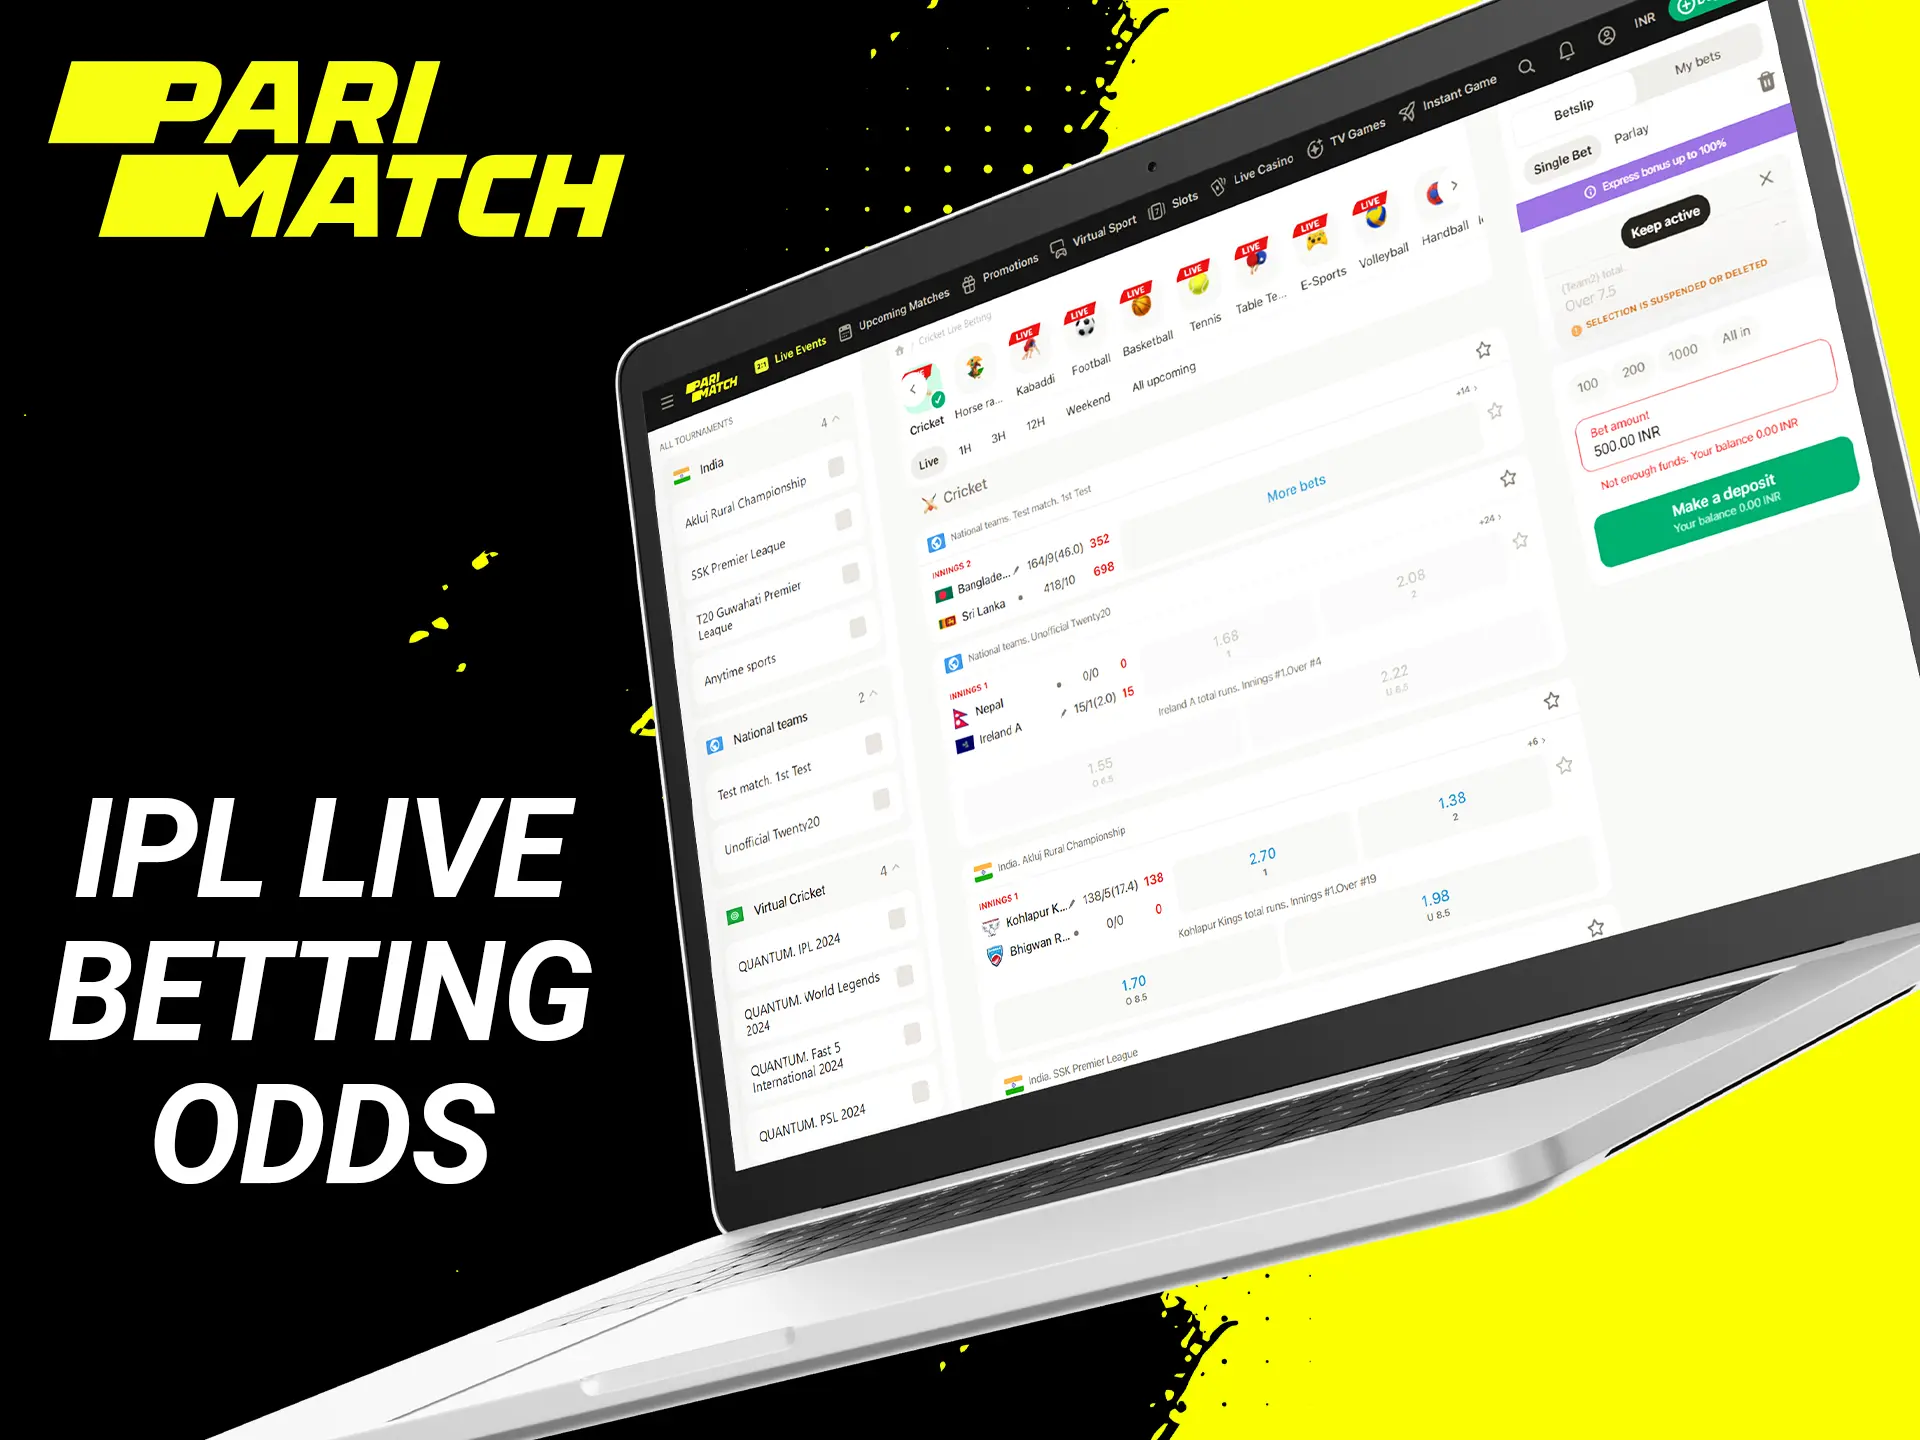 You can bet both at the start of the game and in the middle of the match with IPL Live betting.